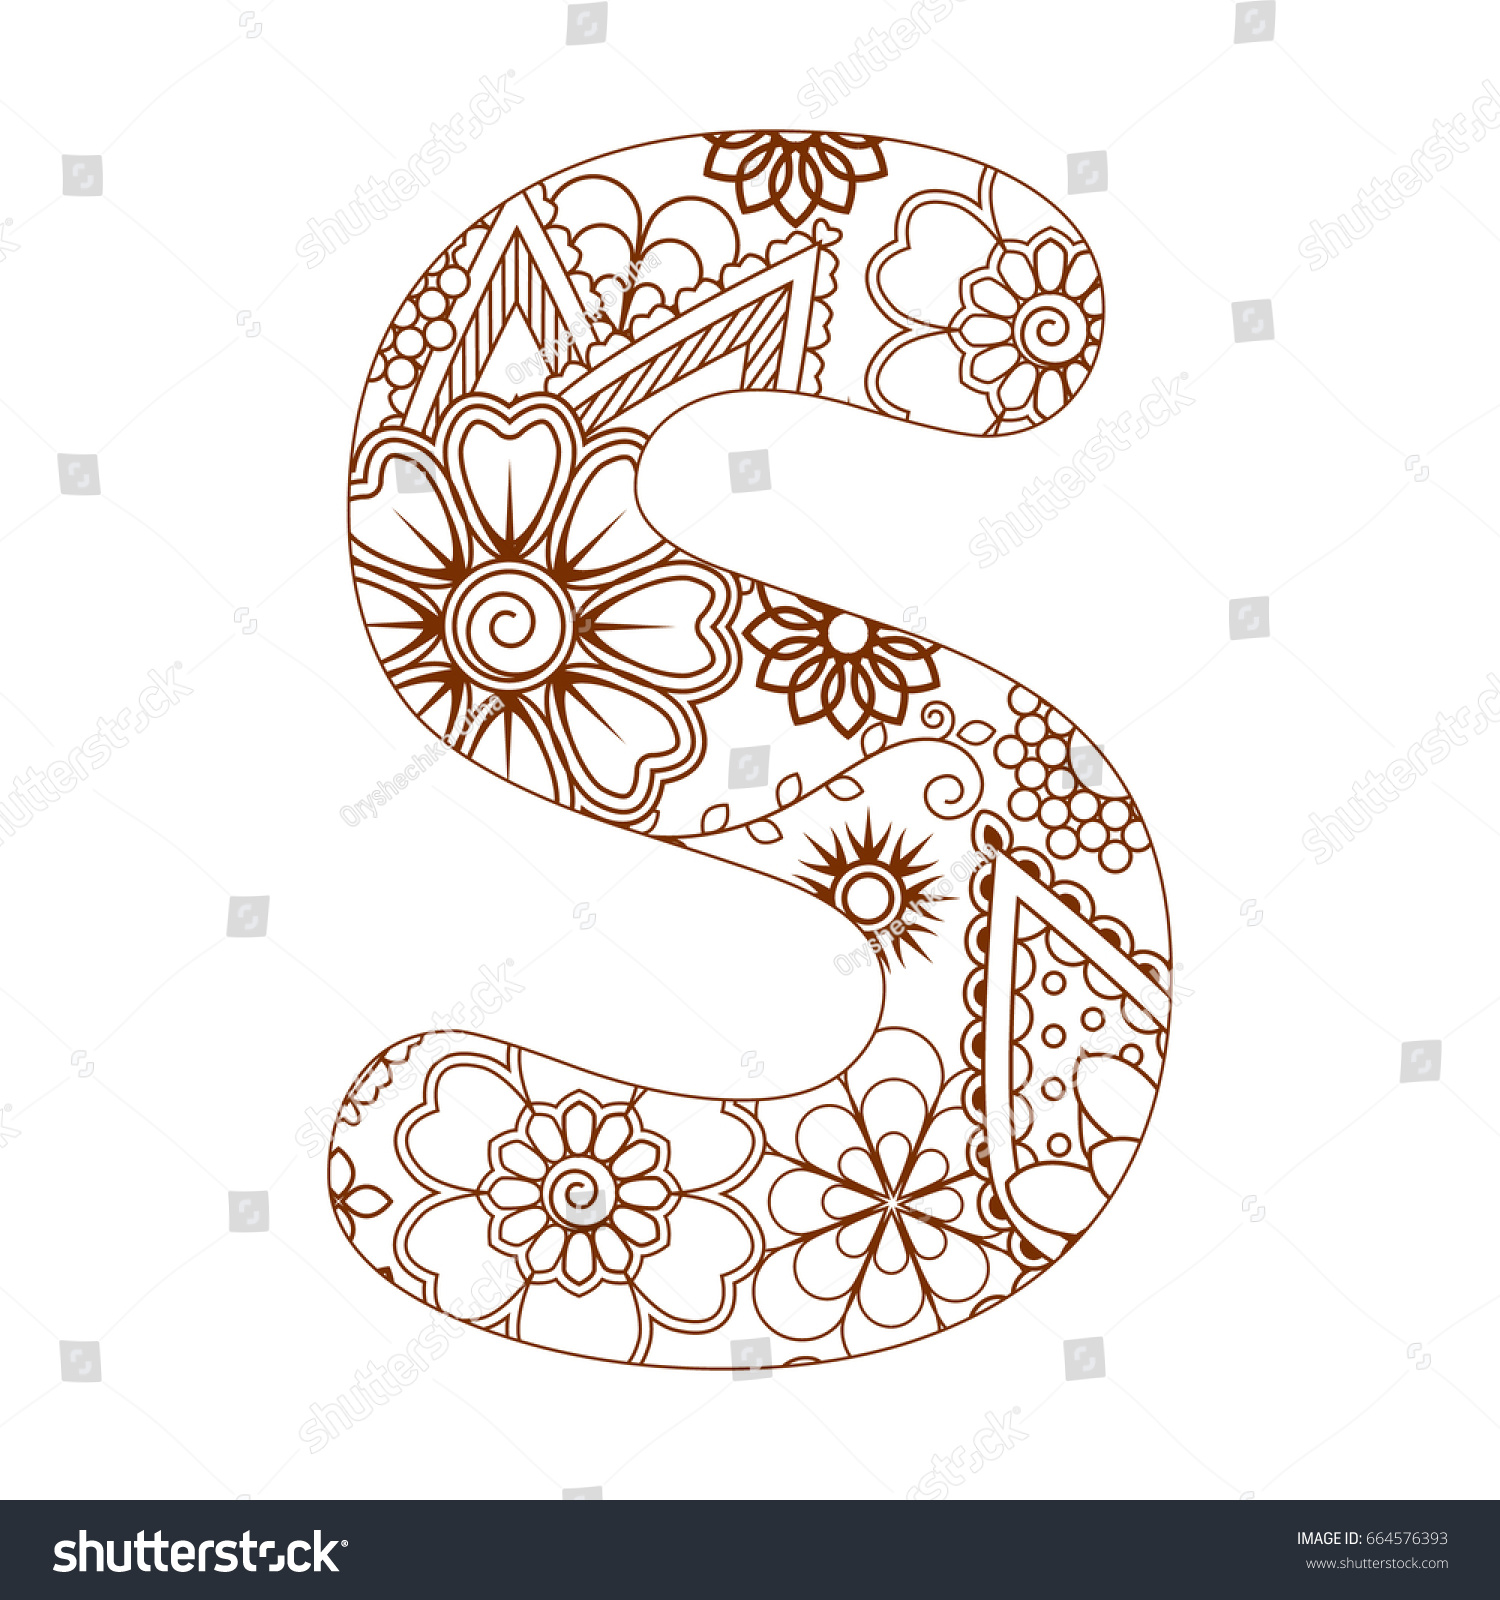 Adult coloring page letter s alphabet stock vector royalty free